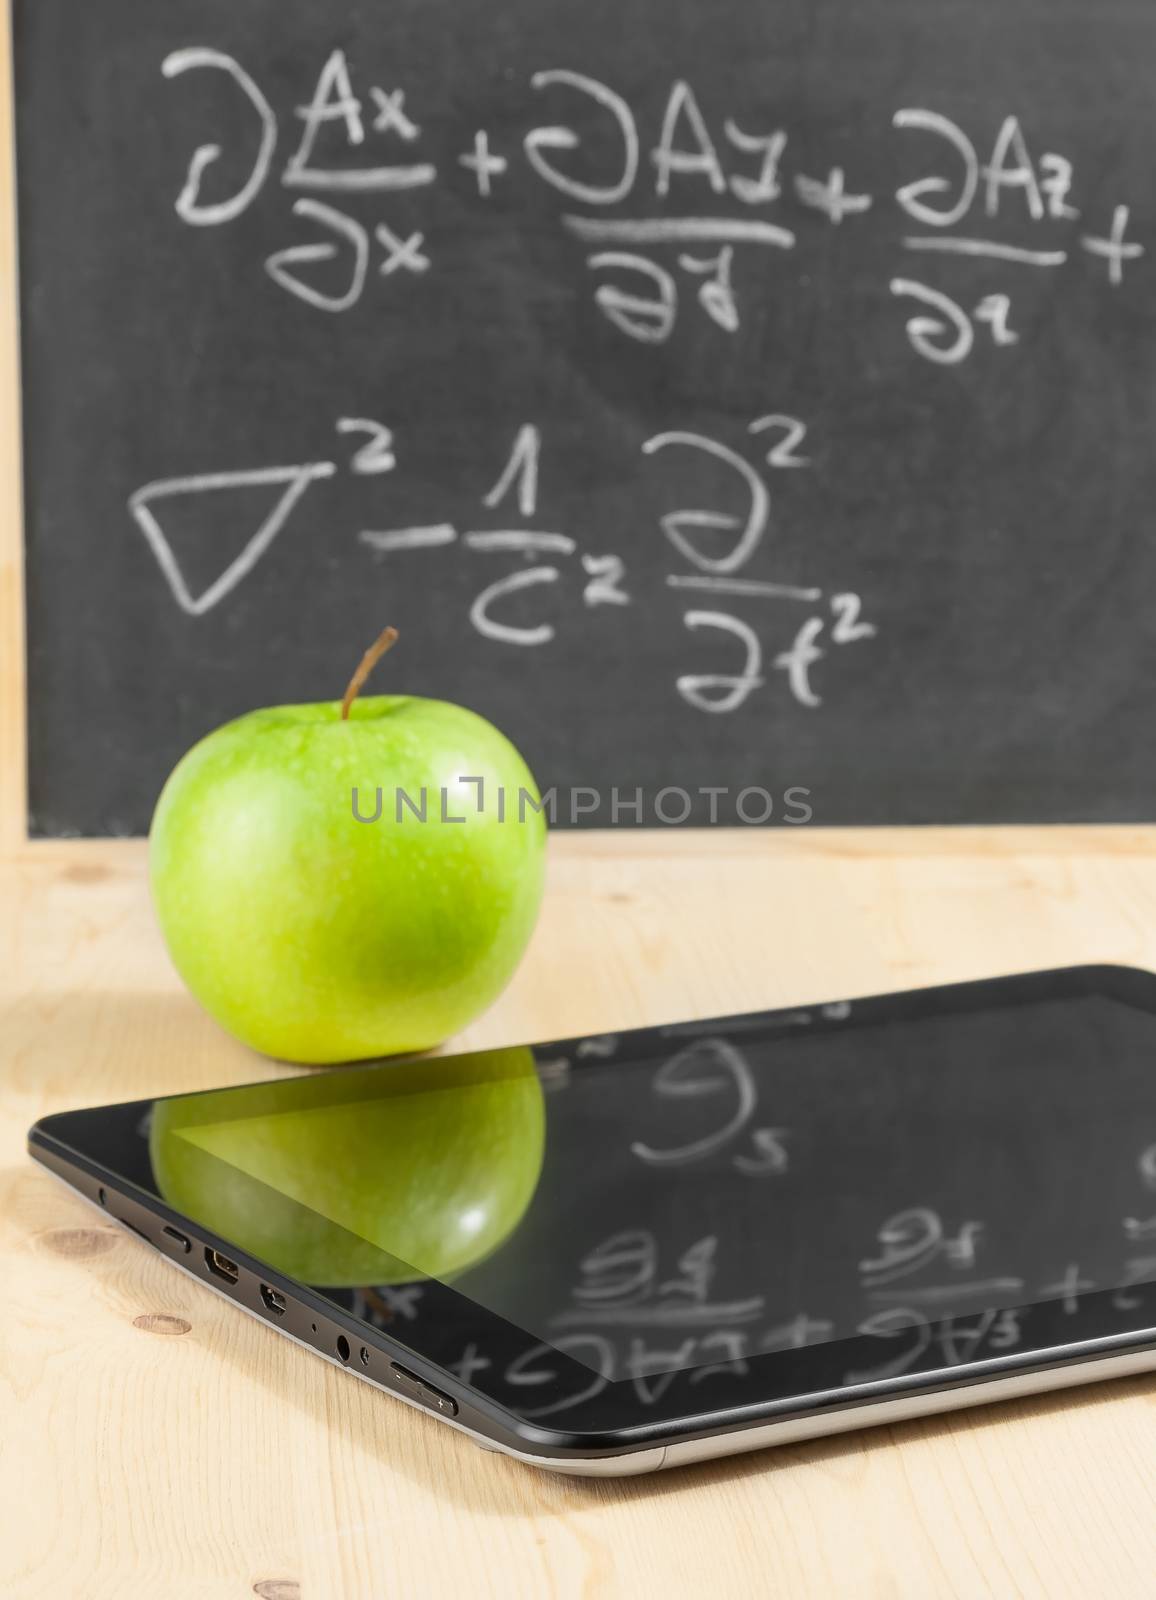 tablet pc and green apple in front of blackboard on wood table by donfiore